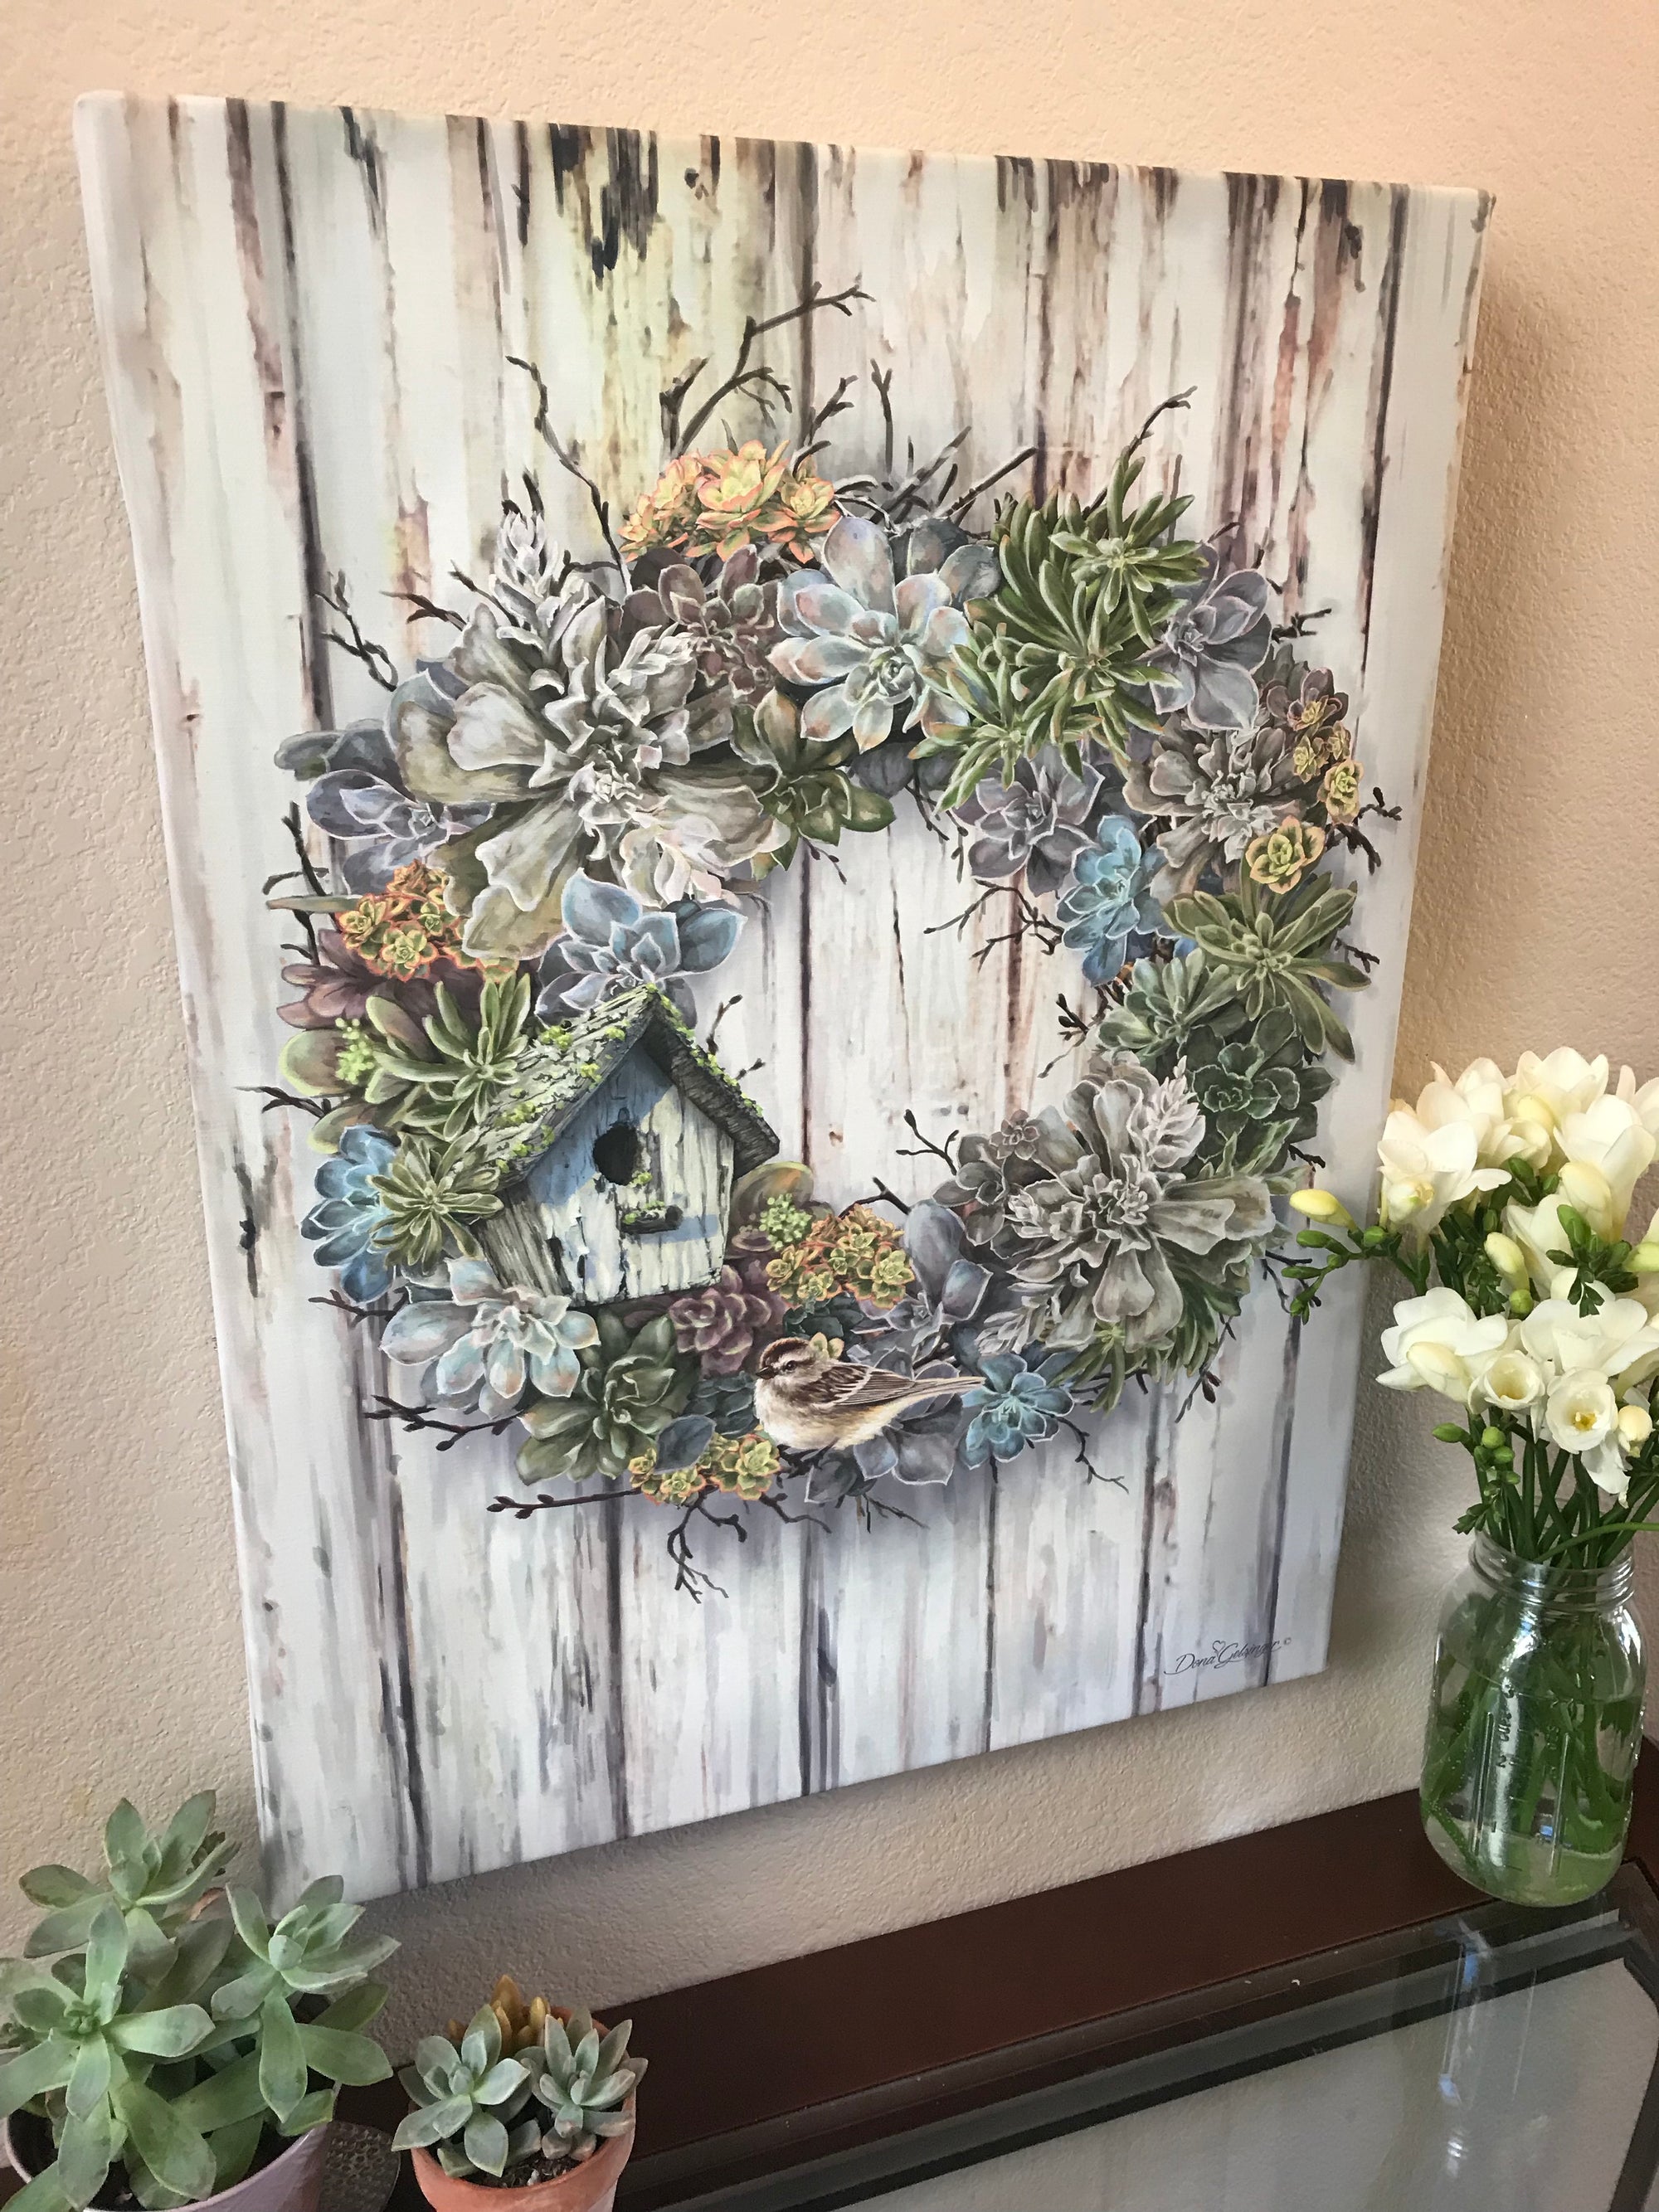 This exquisite canvas features a wreath filled with an array of multicolored green, blue, yellow, and purple succulents, creating a vibrant and captivating display.  As you gaze upon this masterpiece, you'll notice a charming bird house nestled among the succulents, adding a whimsical touch to the scene.